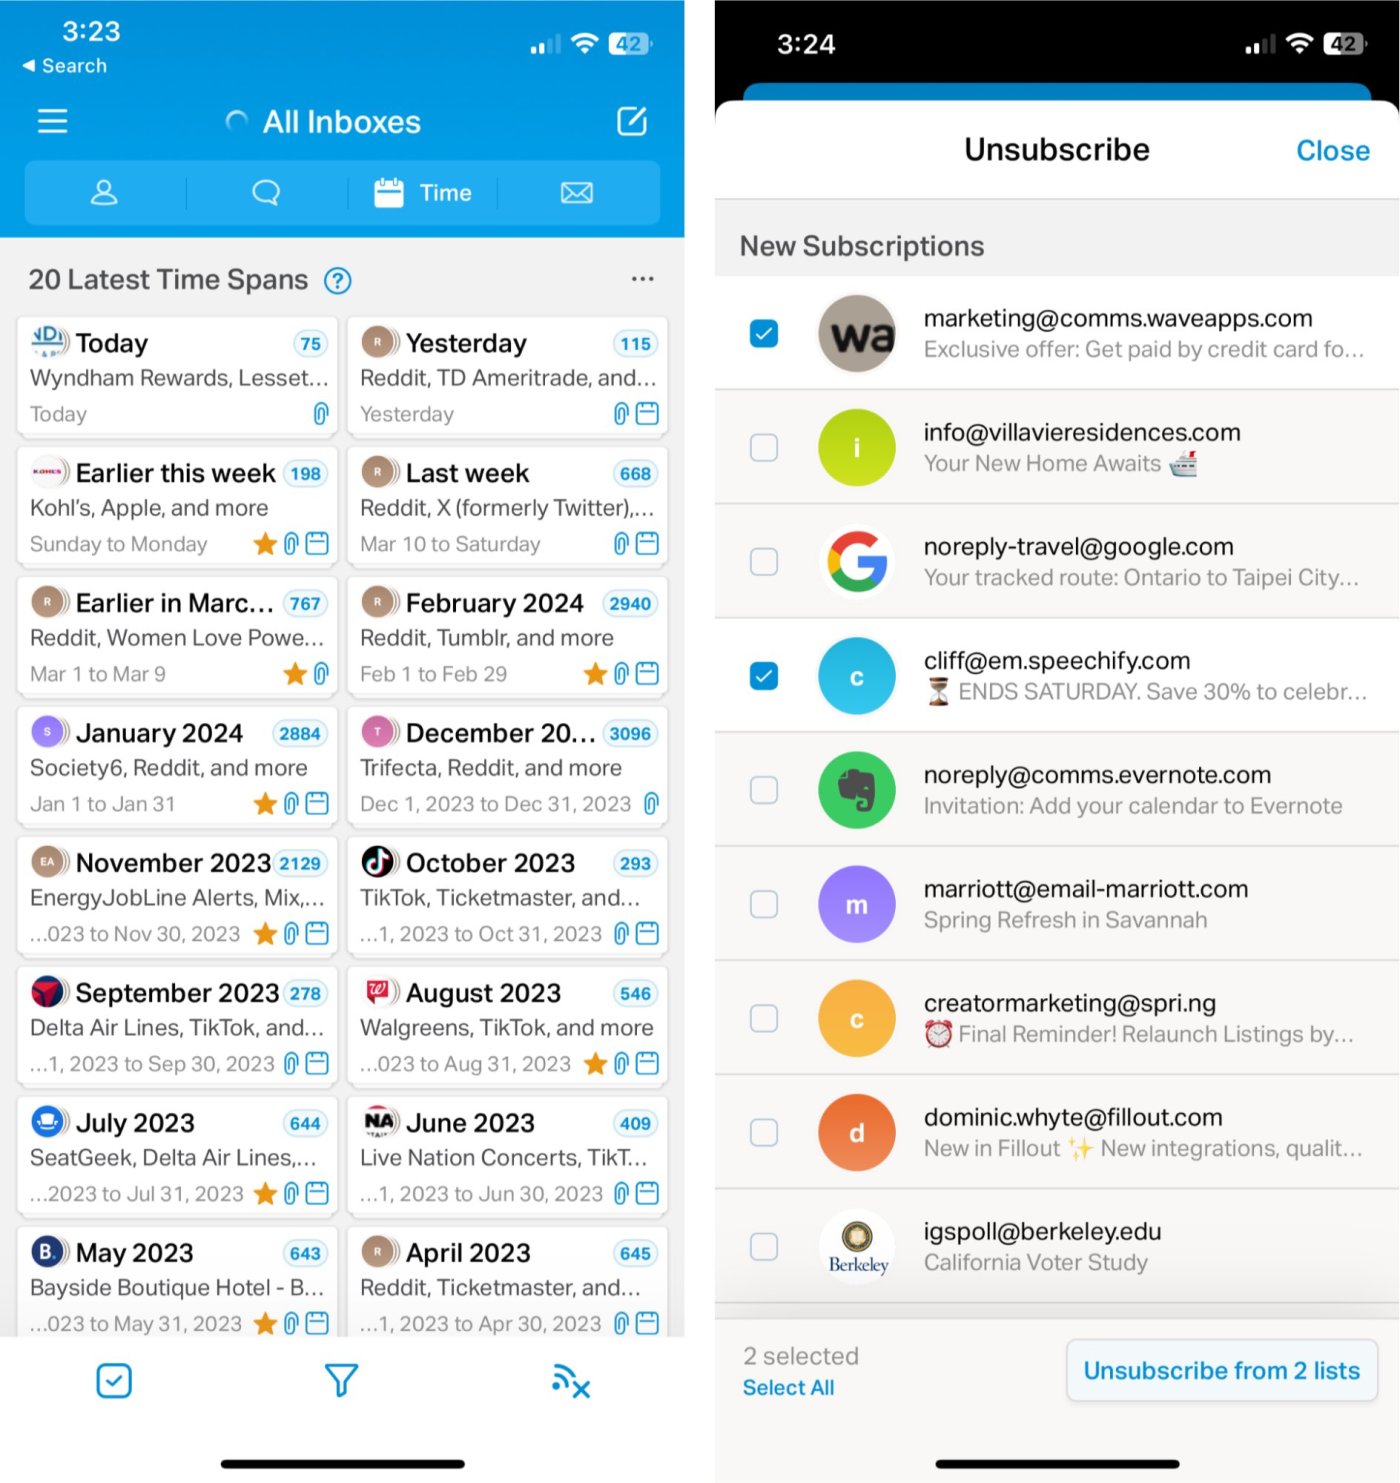 The Chuck iPhone app, our pick for the best iPhone email app for extensive inbox maintenance